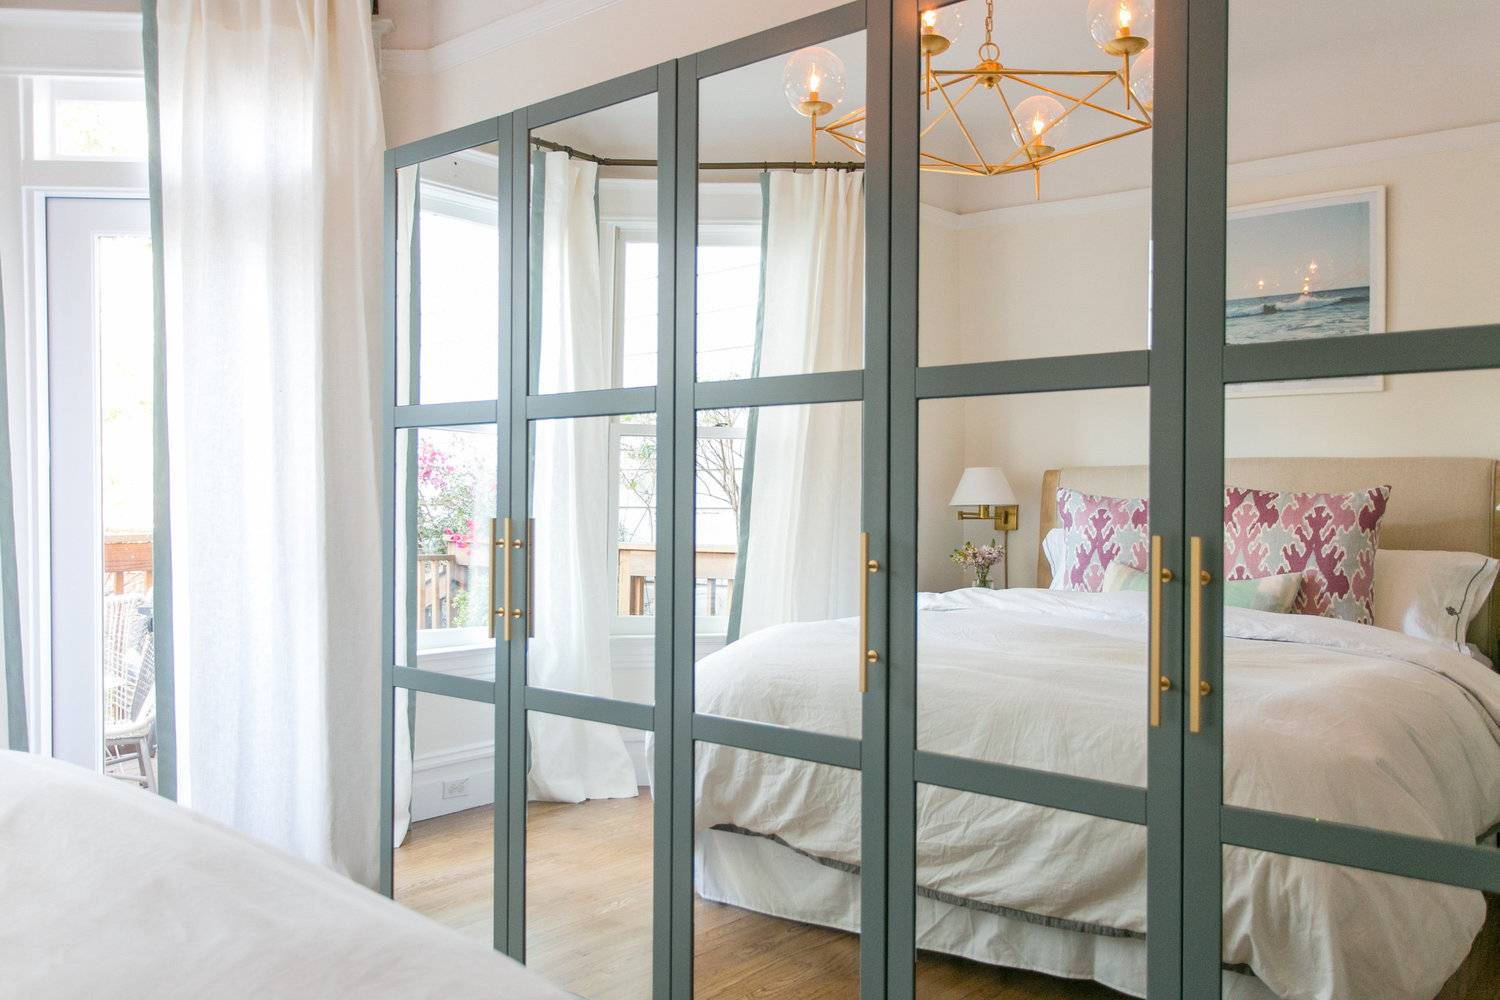 A bed with white bedding is reflected in a wall of mirrors.